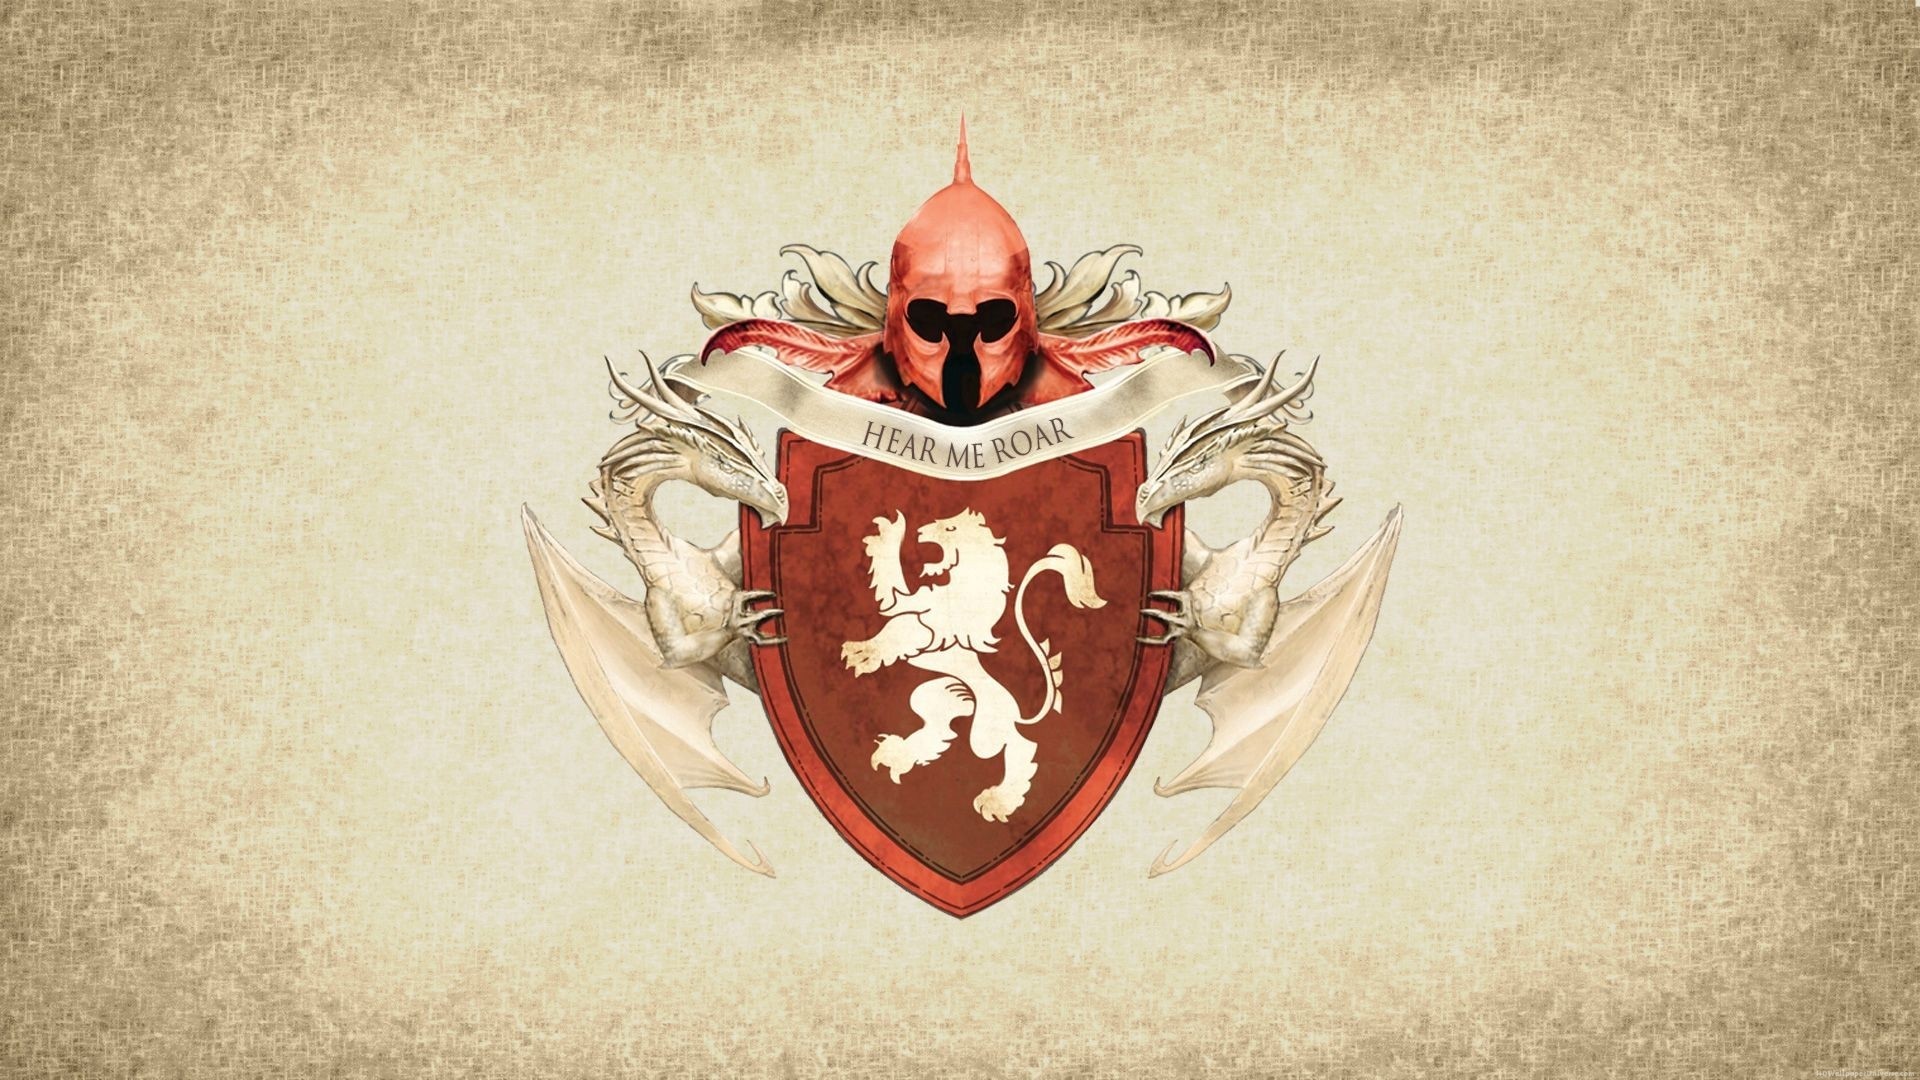 1920x1080 Game of Thrones coat of arms House Lannister HD Wallpaper - http://www